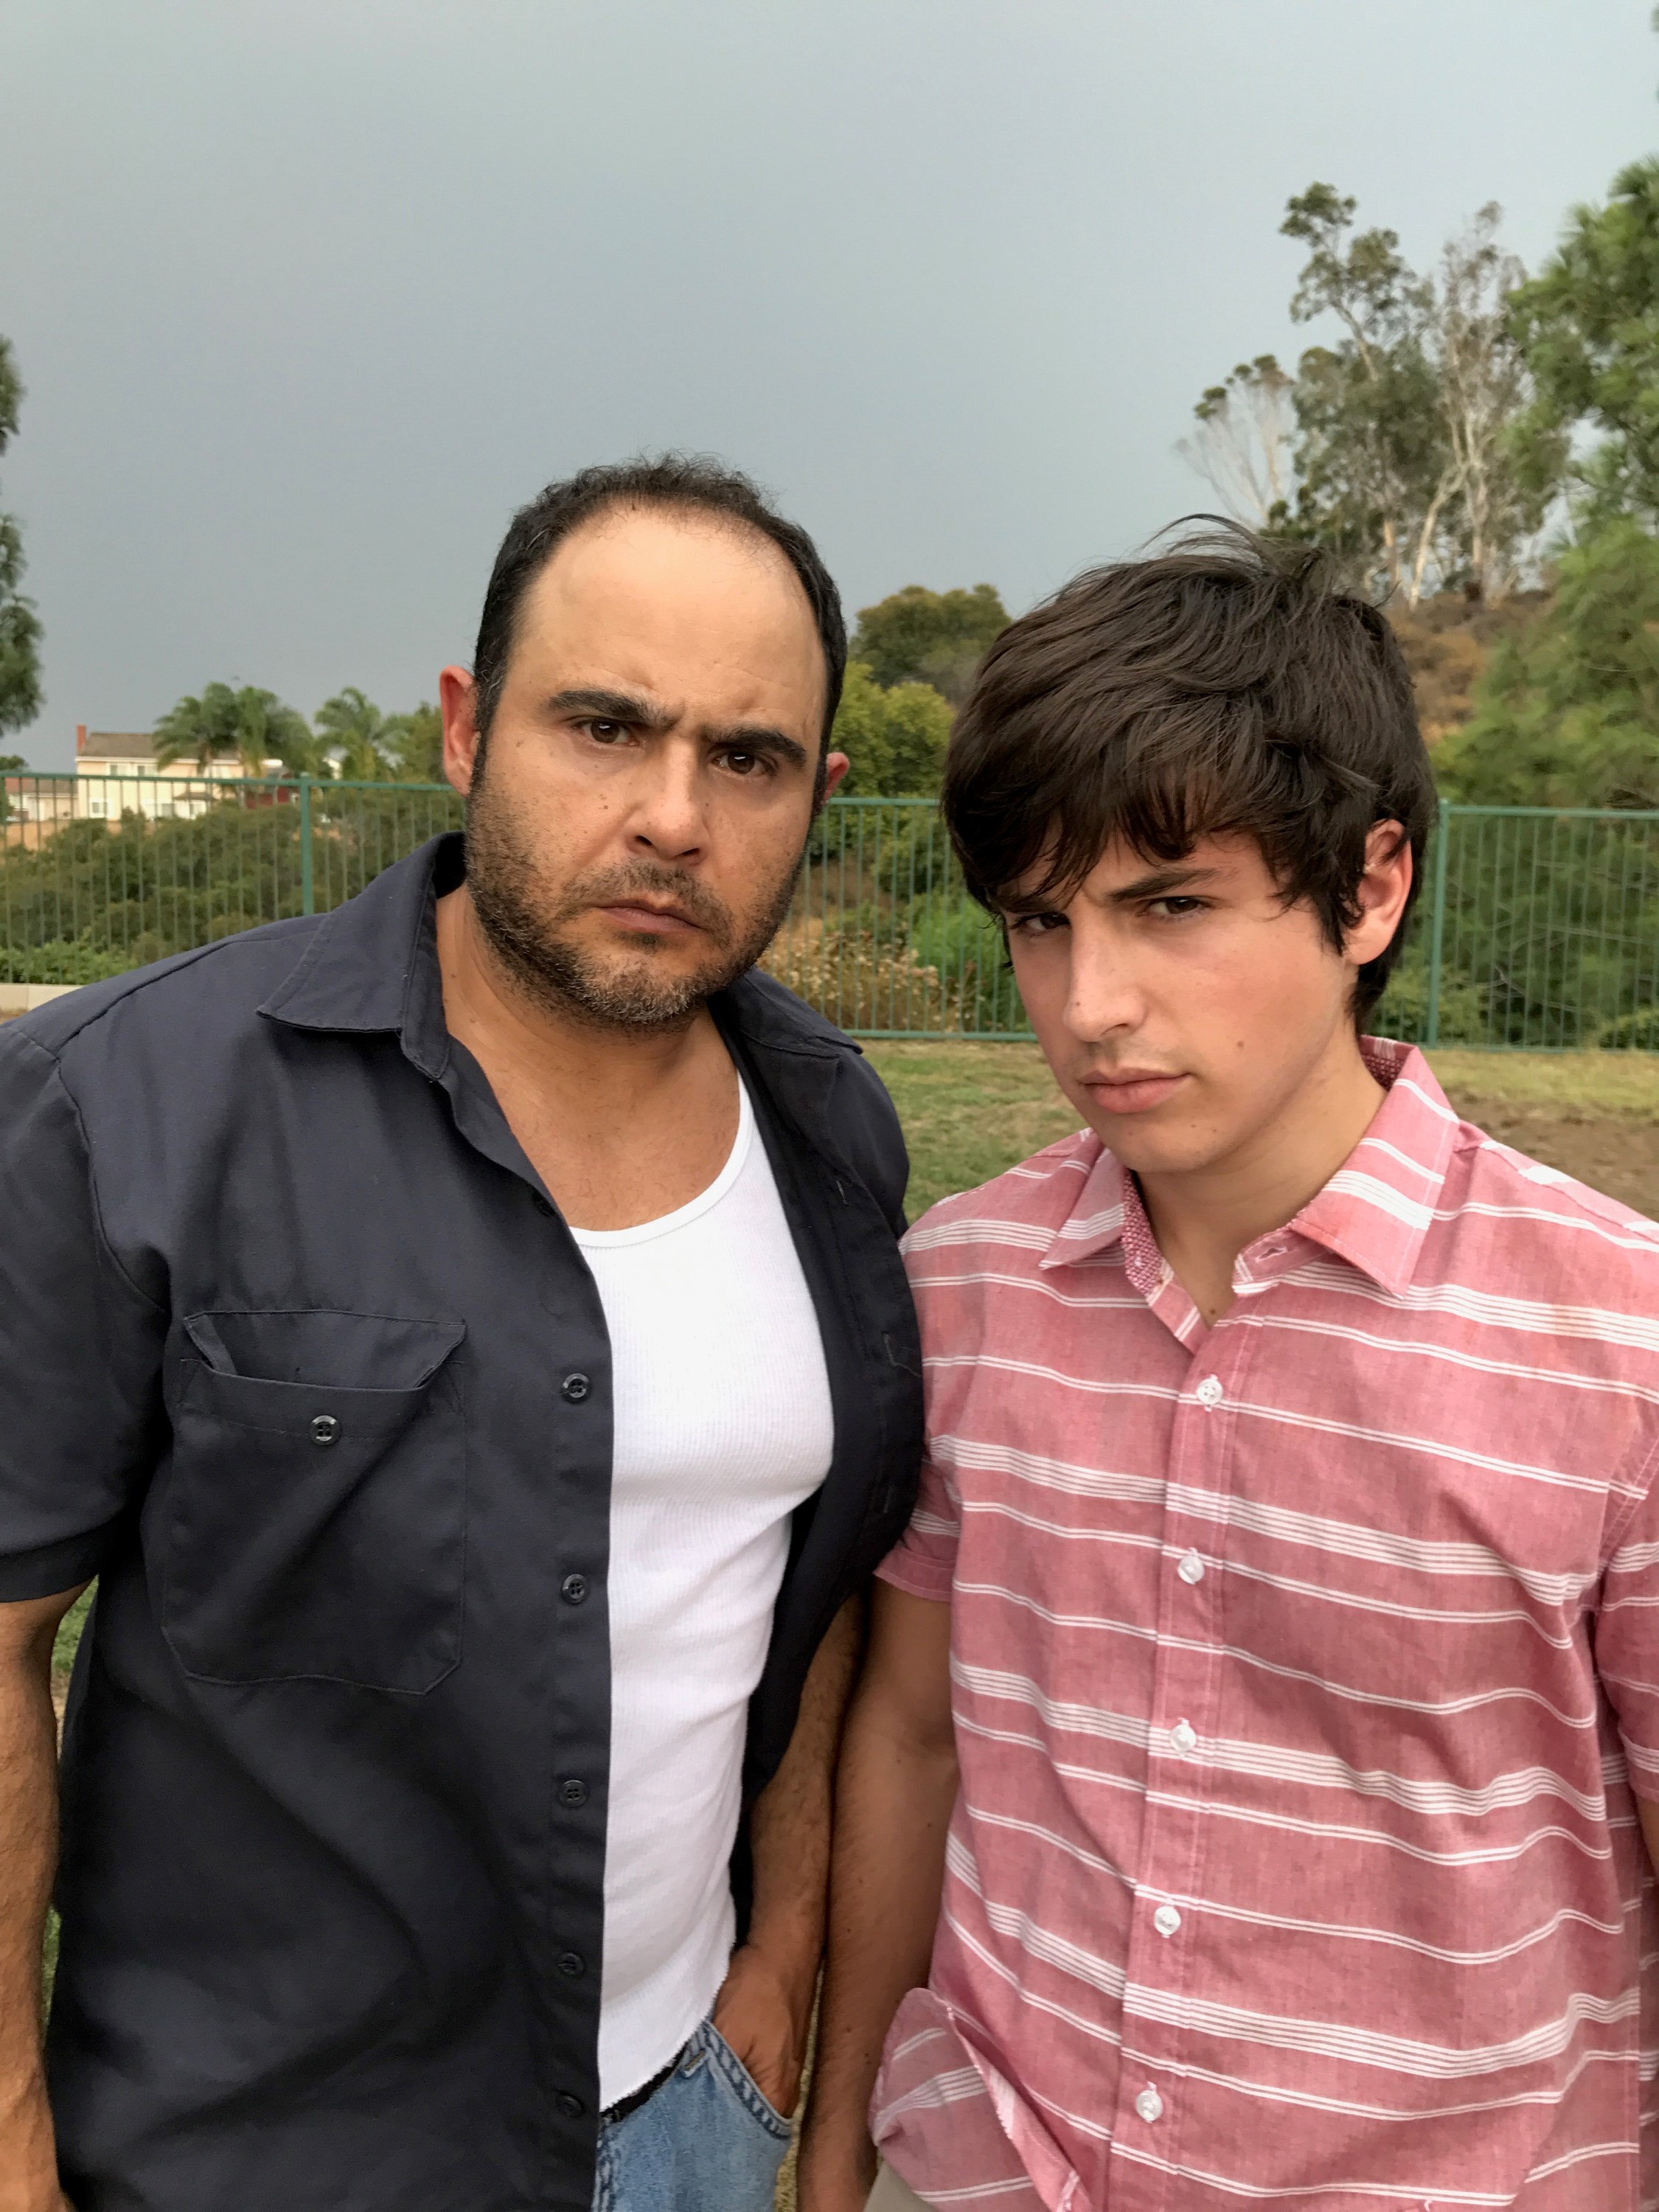 Behind the Scenes of "When It Rings" MANN ALFONSO ("Sam Garland") and GONZALO MARTIN ("Zach Garland")